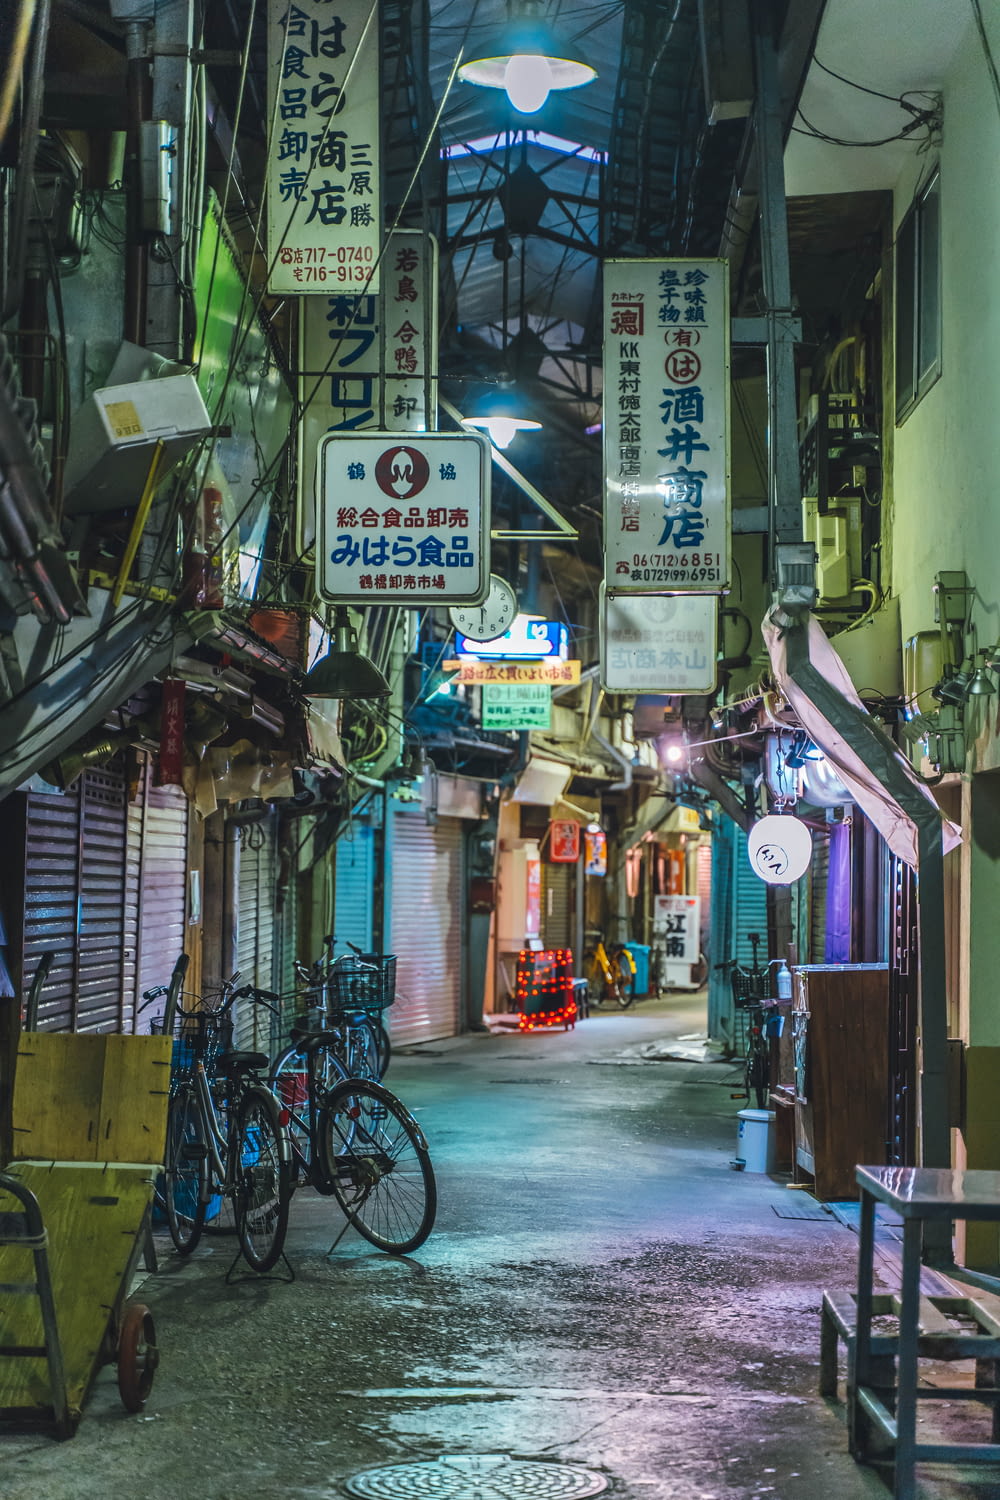 a narrow alley way with many signs hanging from the ceiling